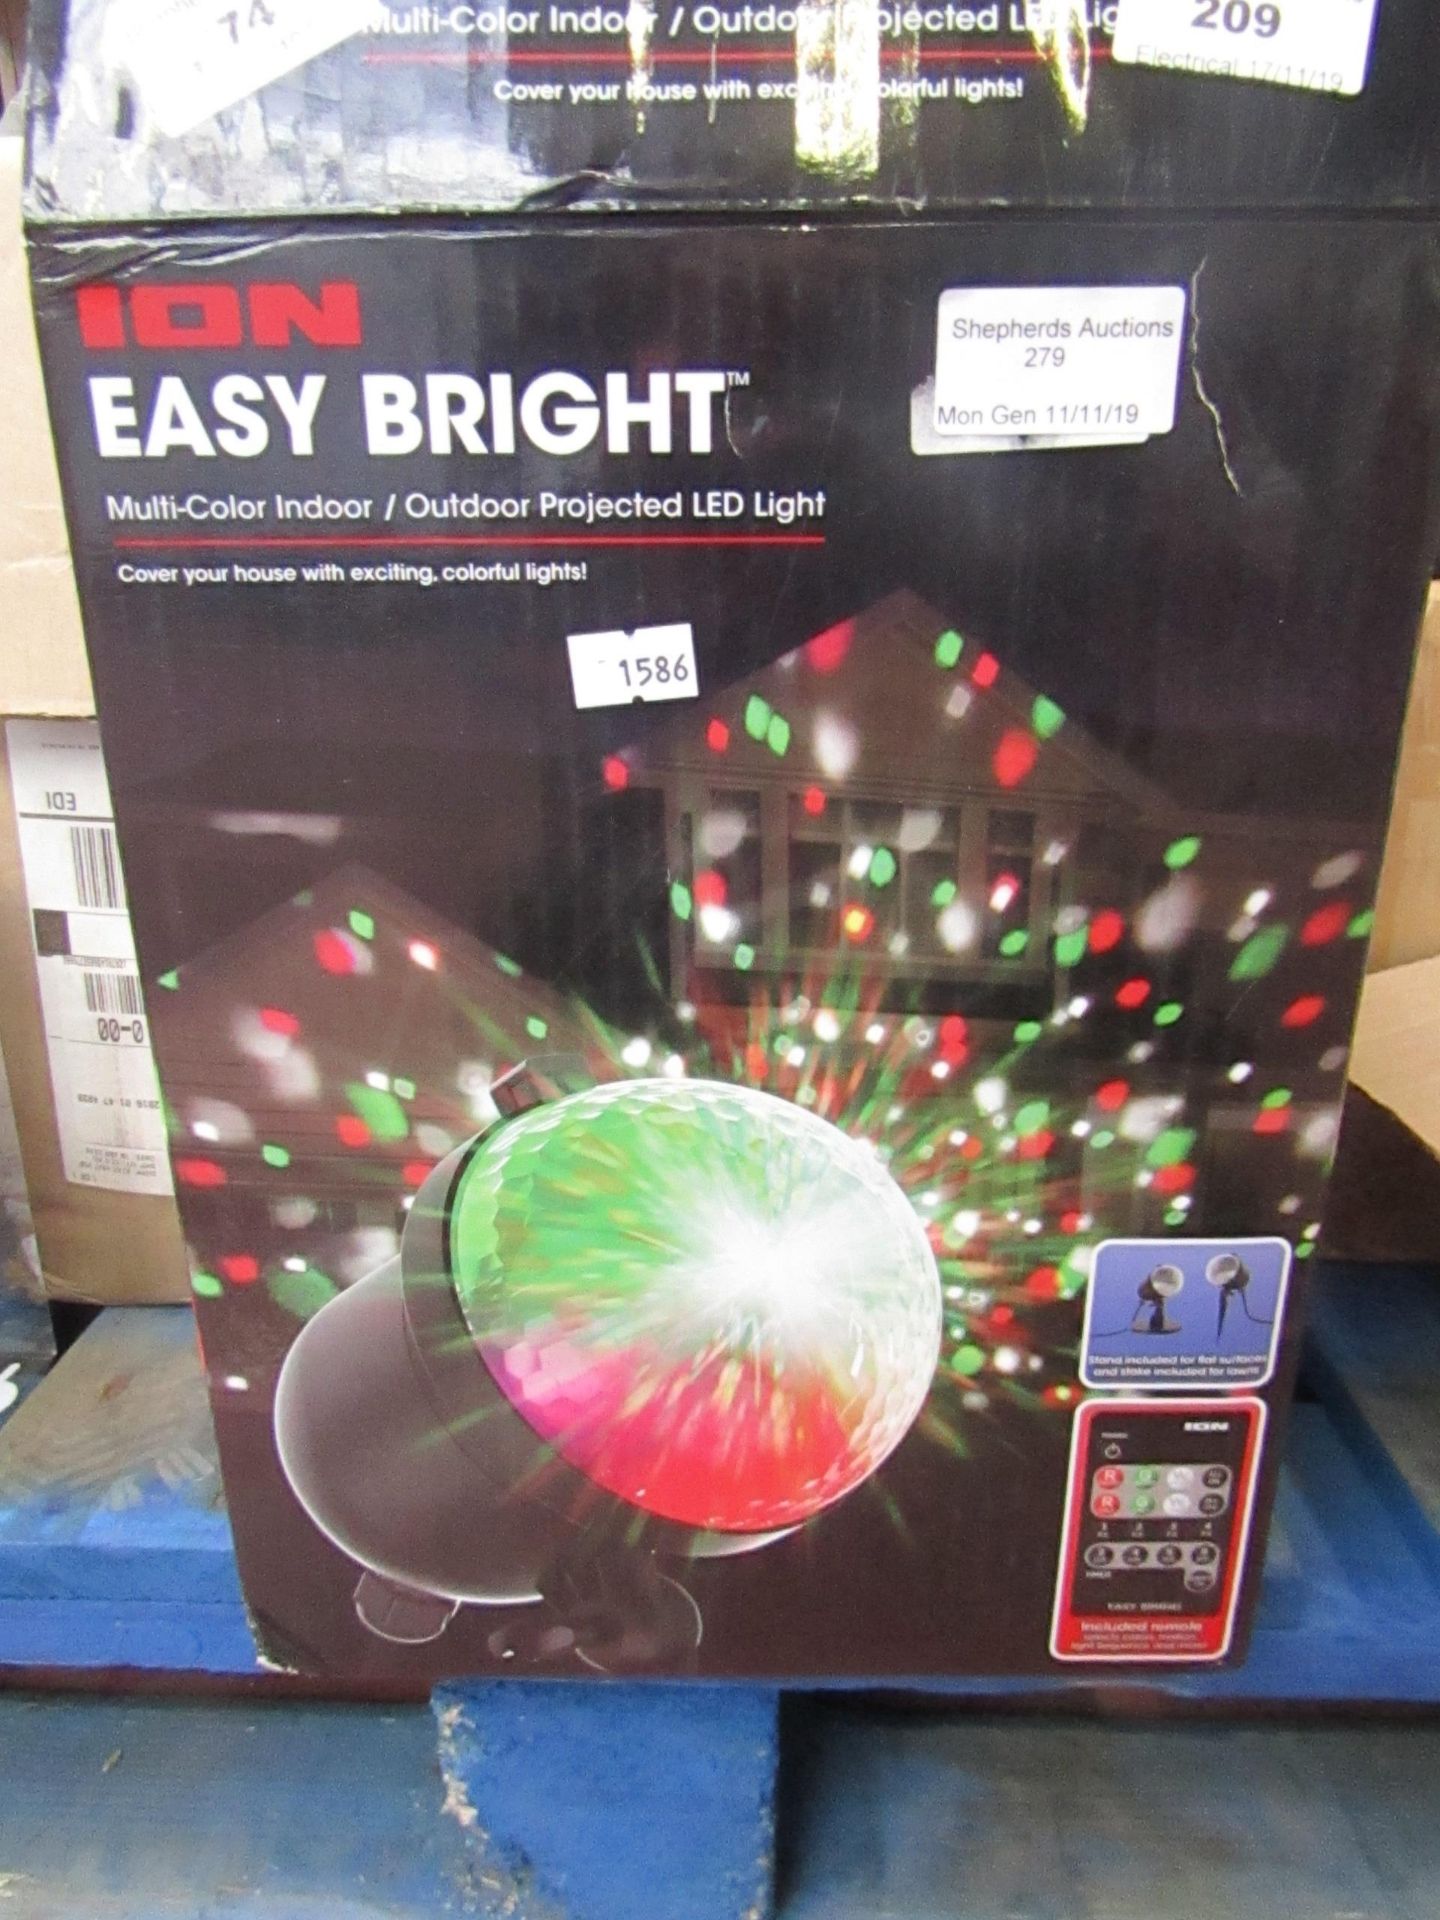 ION - Easy bright Multi-coloured LED projected light, untested and boxed.